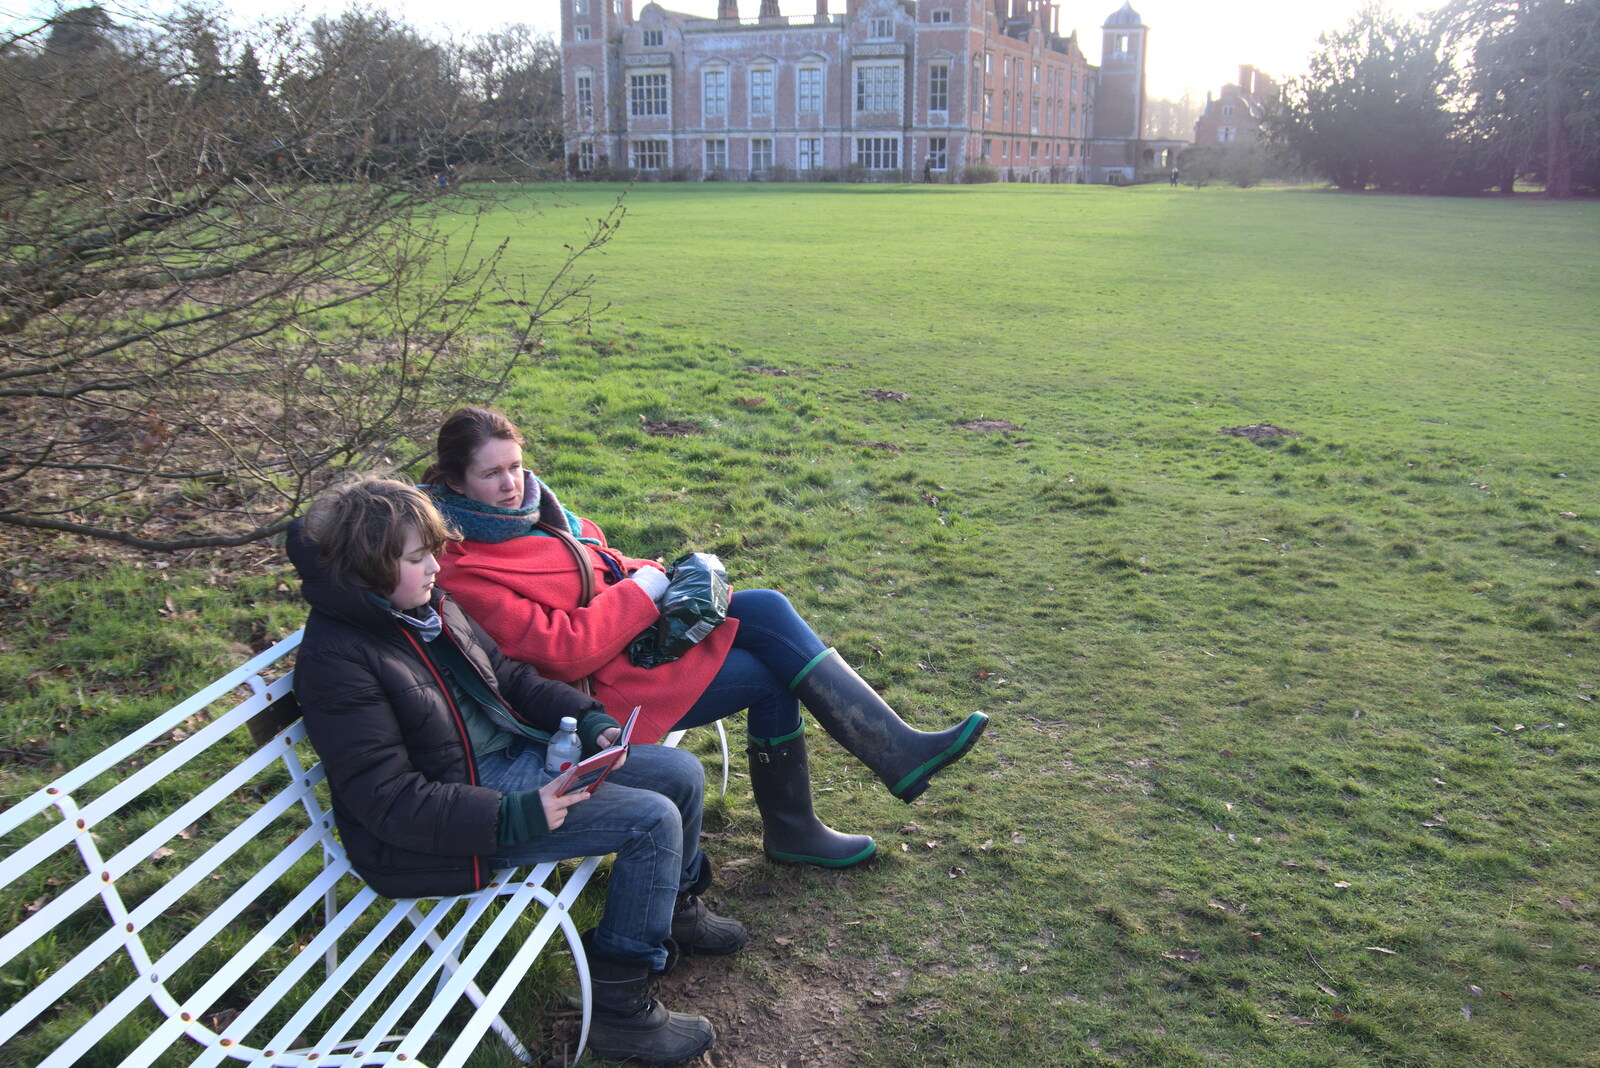 Fred and Isobel on the bench from A Visit to Blickling Hall, Aylsham, Norfolk - 9th January 2022